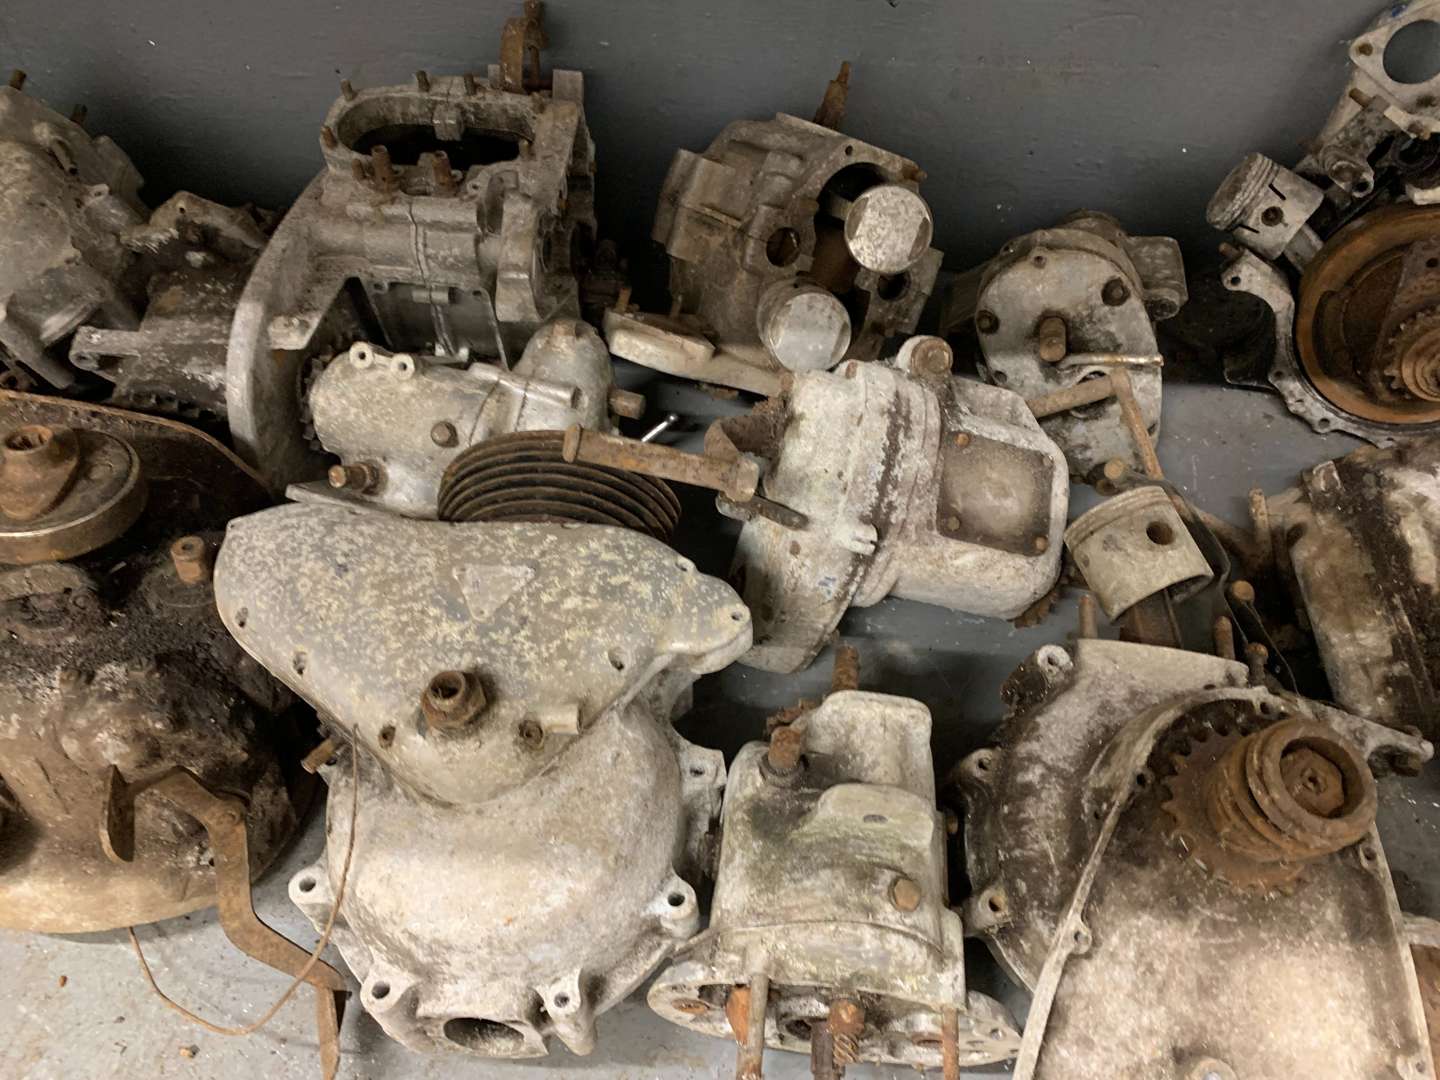 <p>Large Quantity of Vintage Motorcycle Engines and Spares</p>